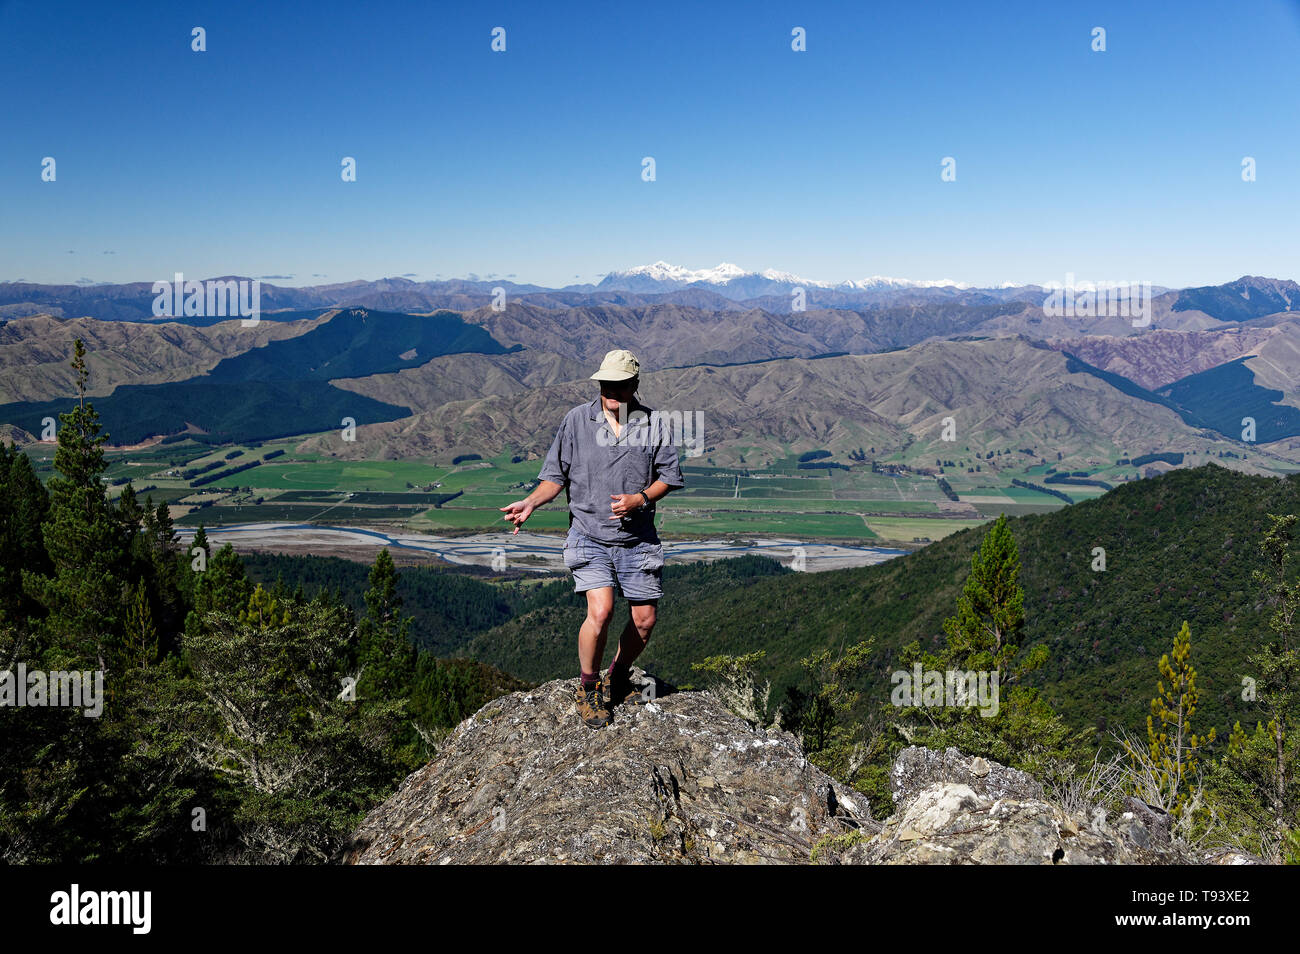 Dance like no one is watching, on a rocky outcrop in New Zealand, an older man enjoys the great outdoors and behaves younger than his years. Stock Photo